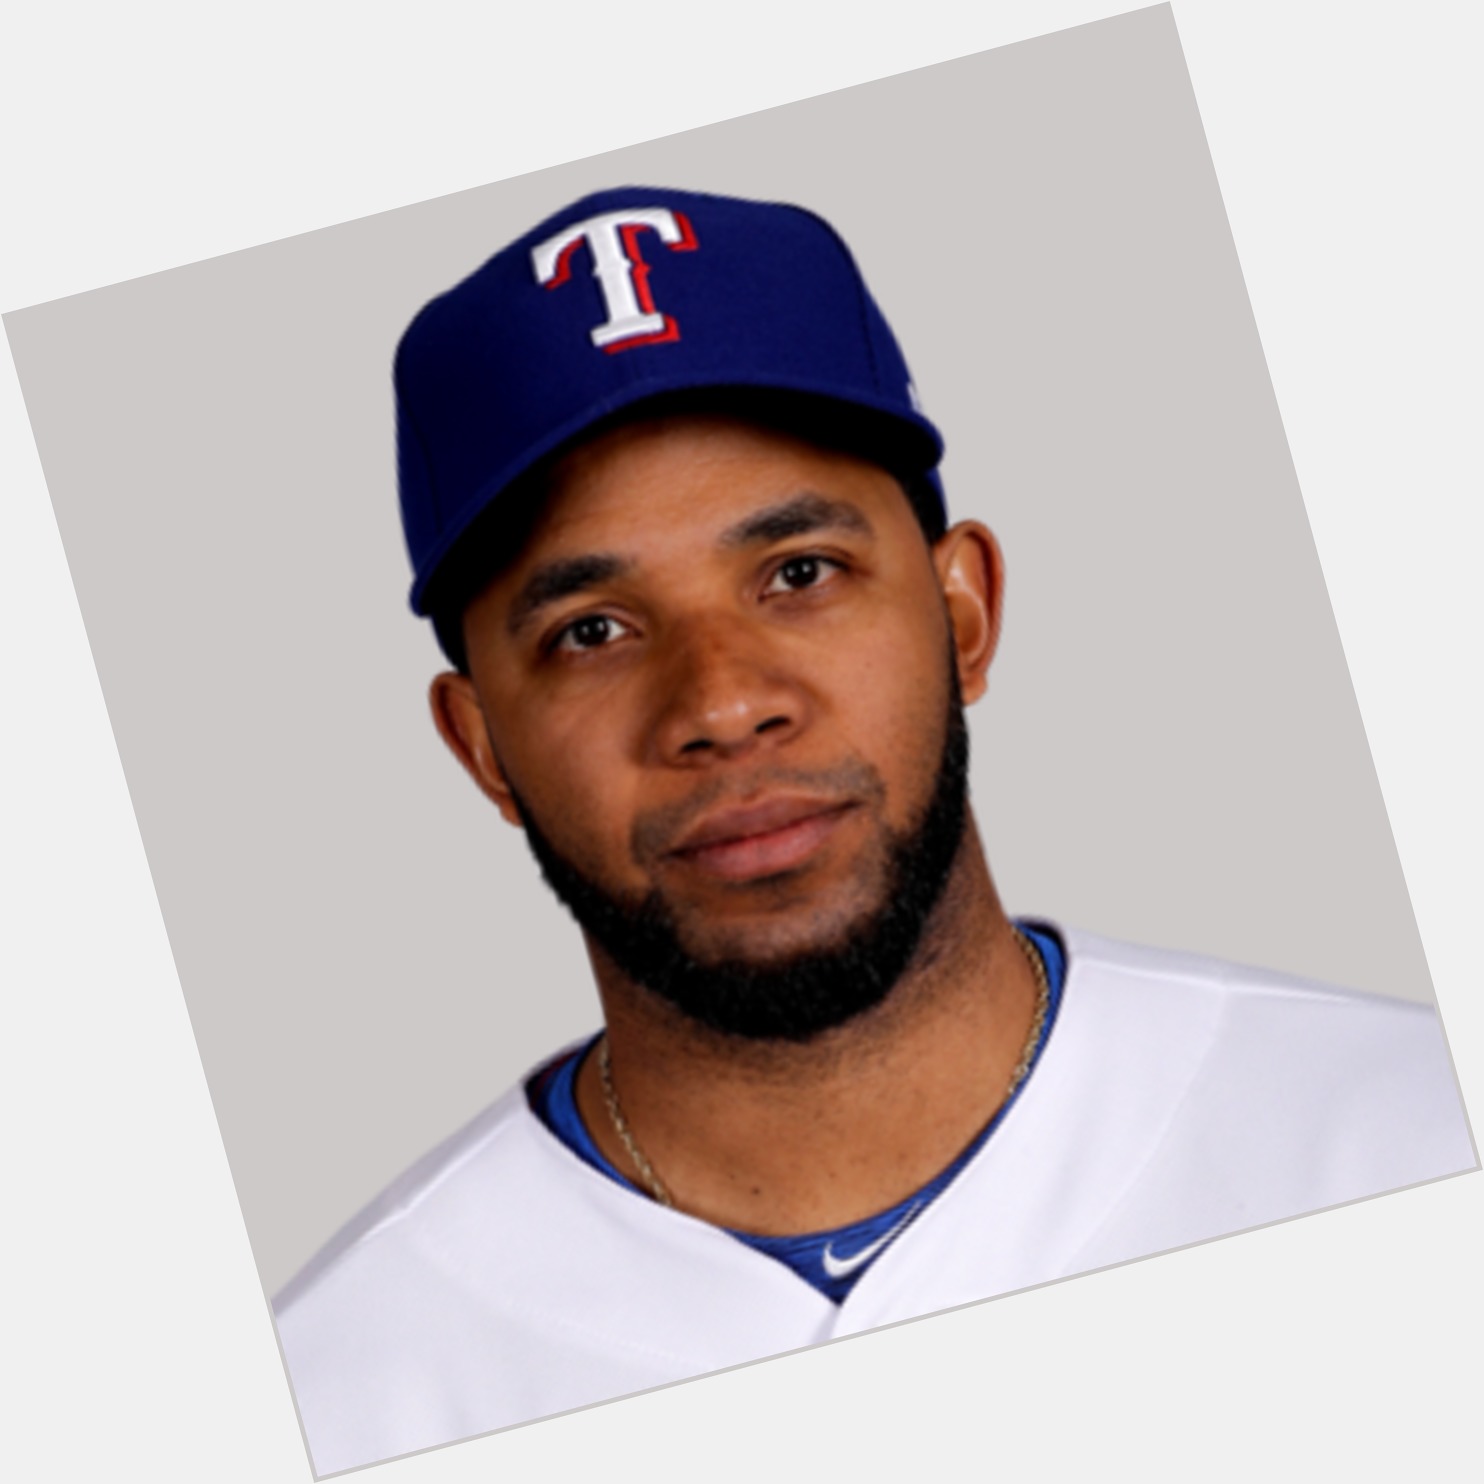 <a href="/hot-men/elvis-andrus/is-he-married-where">Elvis Andrus</a>  